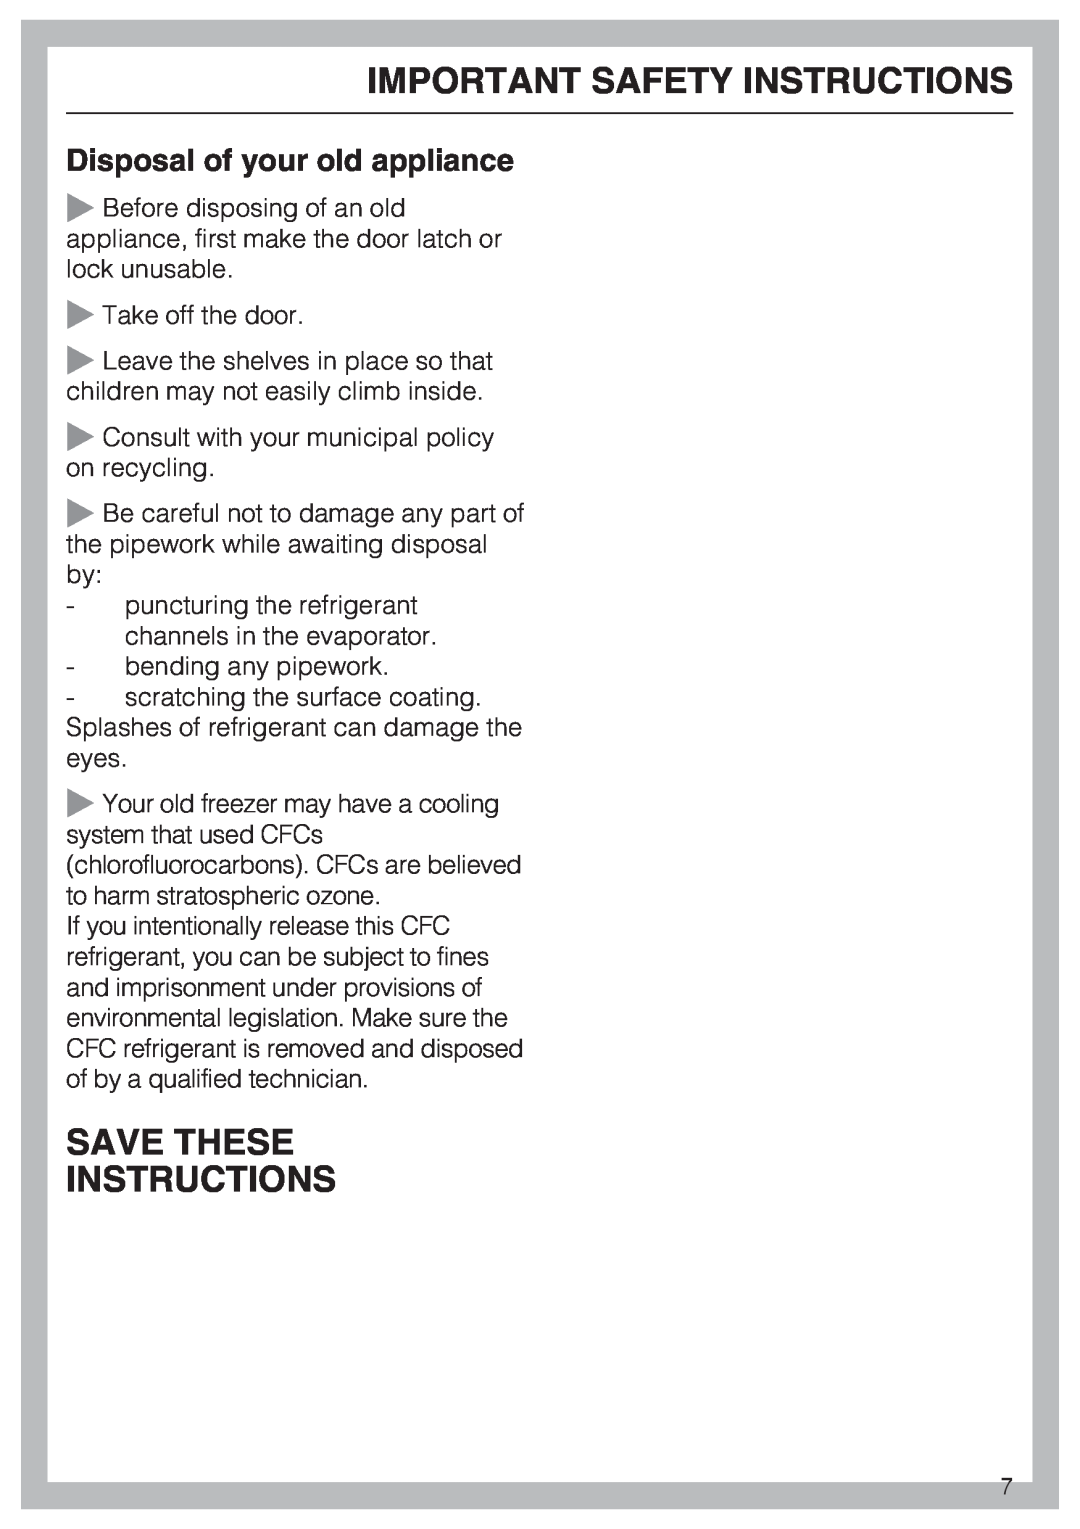 Miele F 1411 SF Save These Instructions, Disposal of your old appliance, Important Safety Instructions 